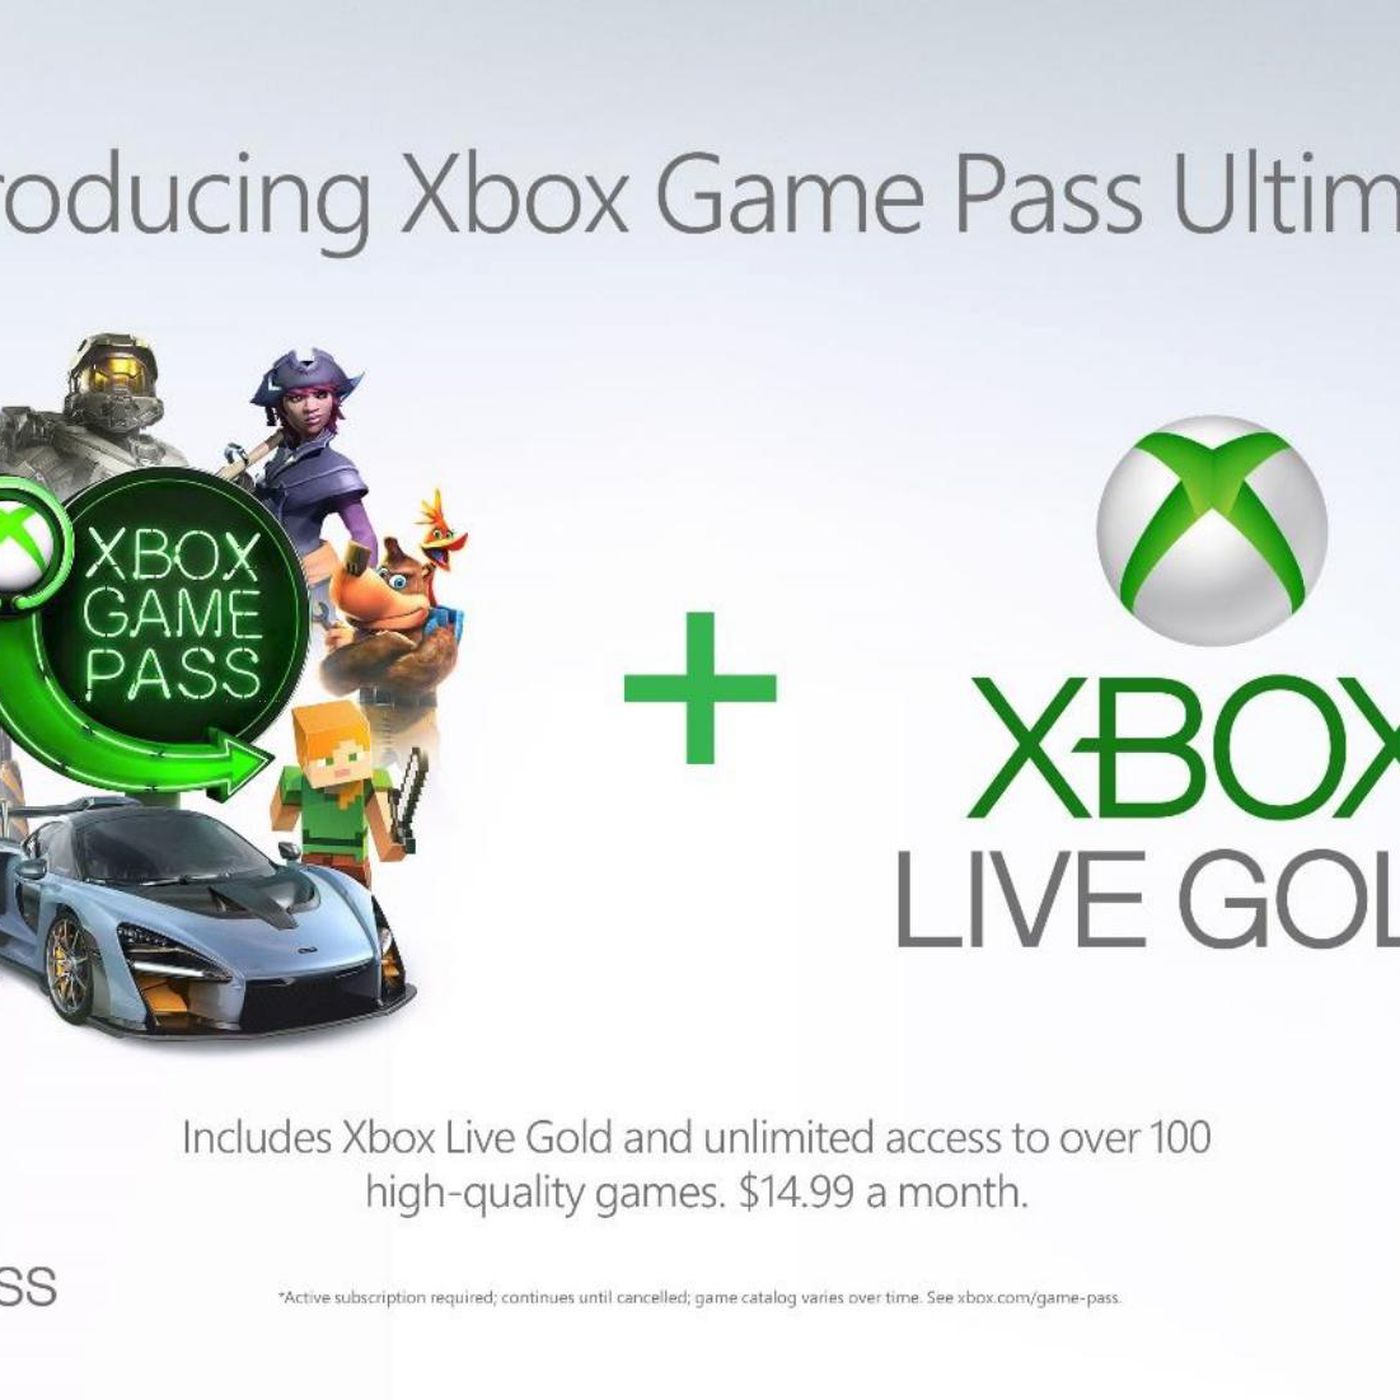 veld Bandiet textuur Xbox Game Pass Ultimate: Xbox Live and Xbox Game Pass for $14.99 a month -  The Verge